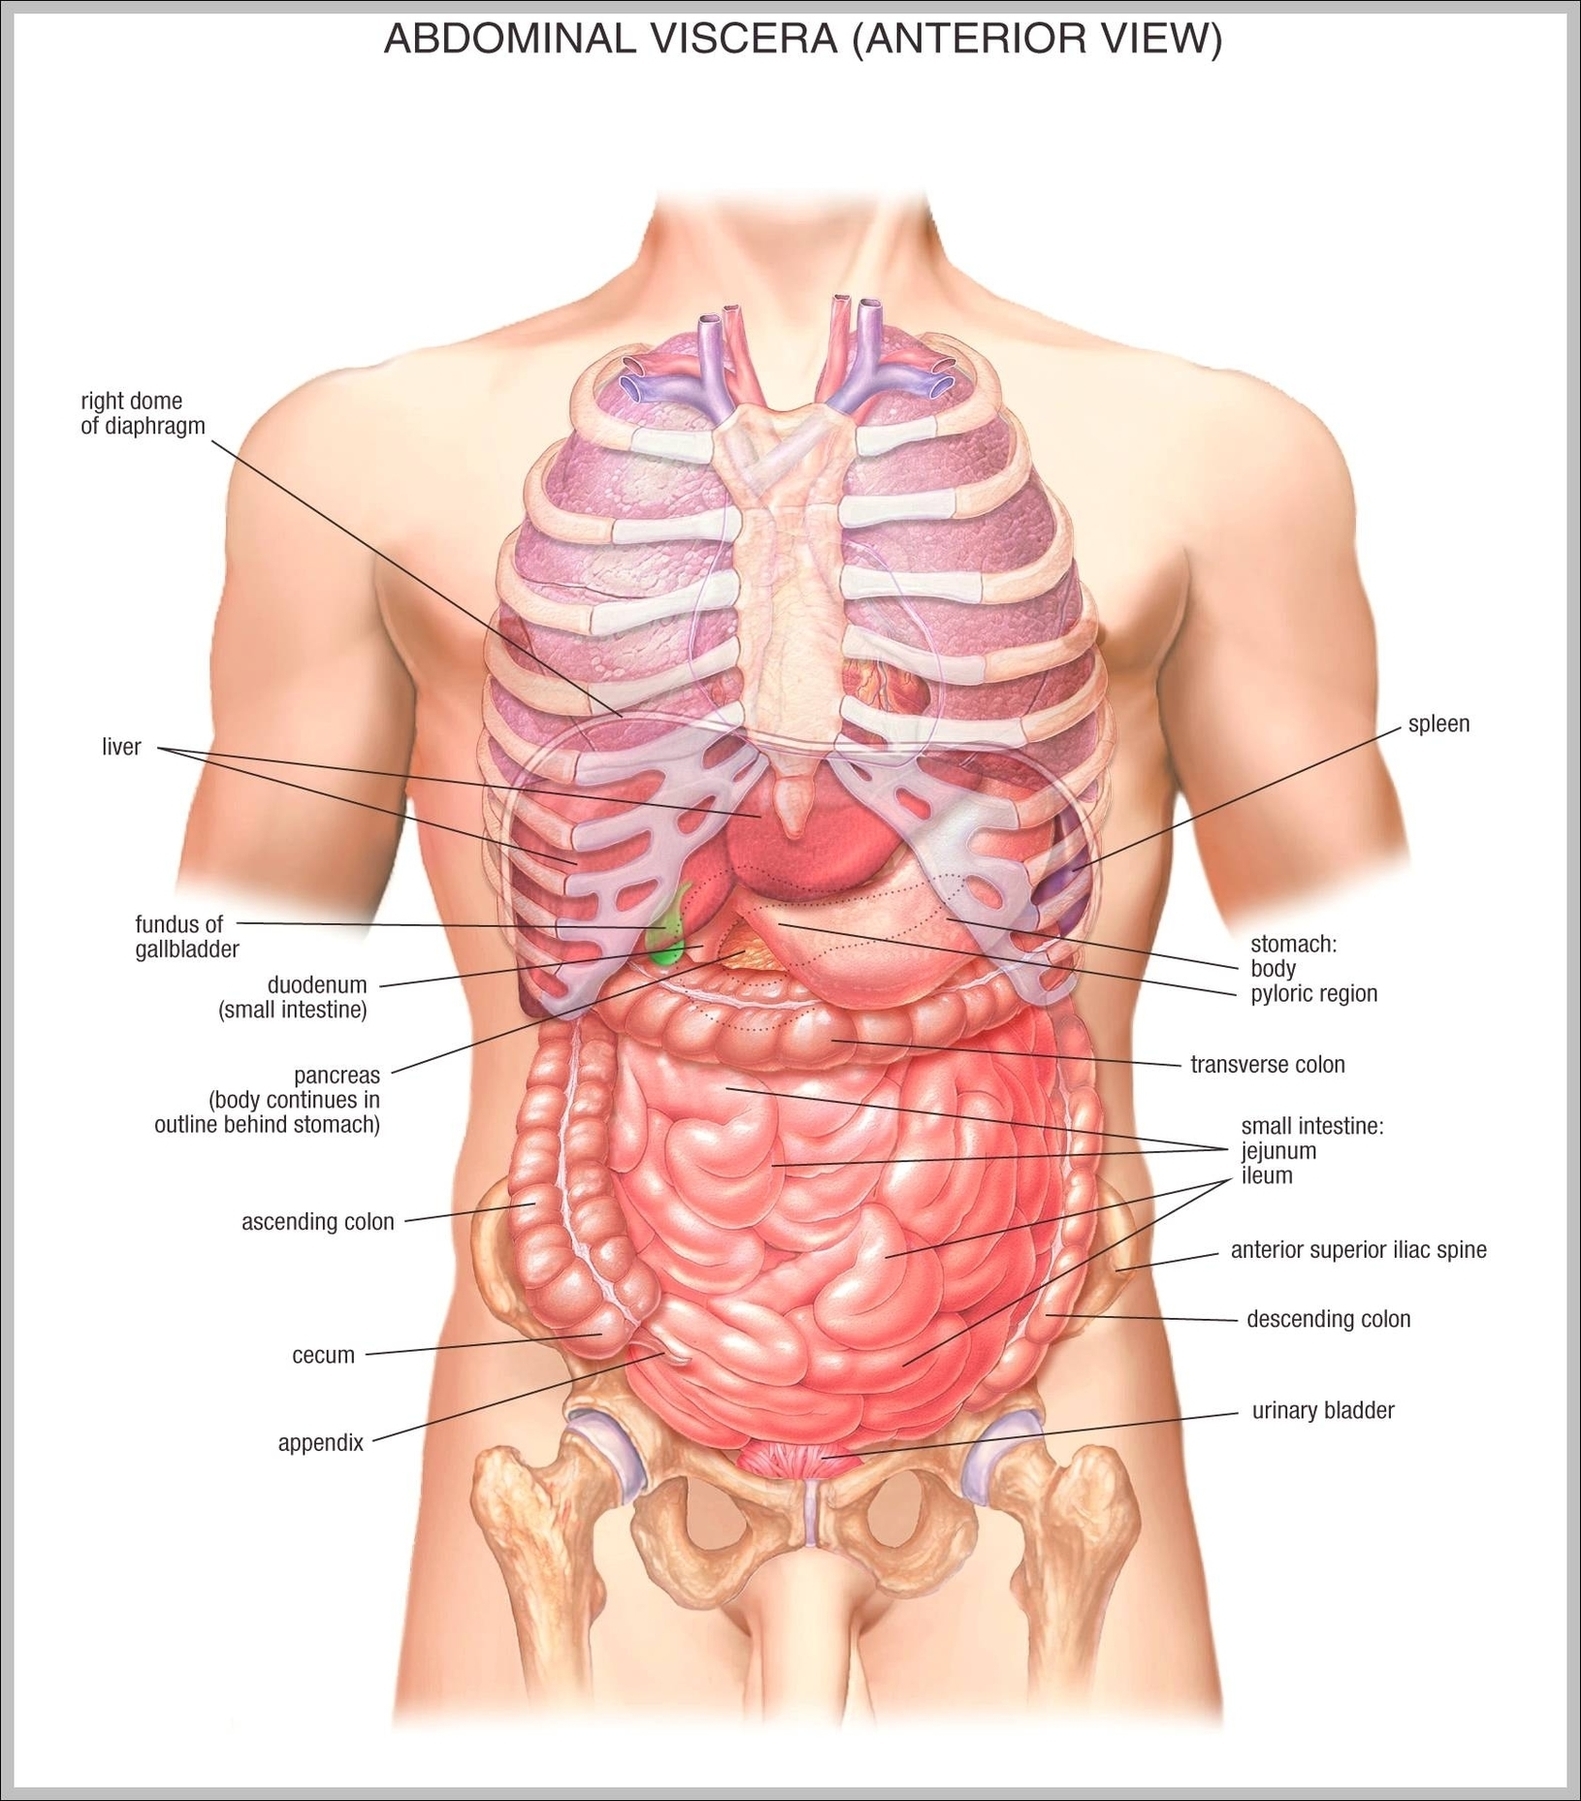 Pictures Of Anatomy Image